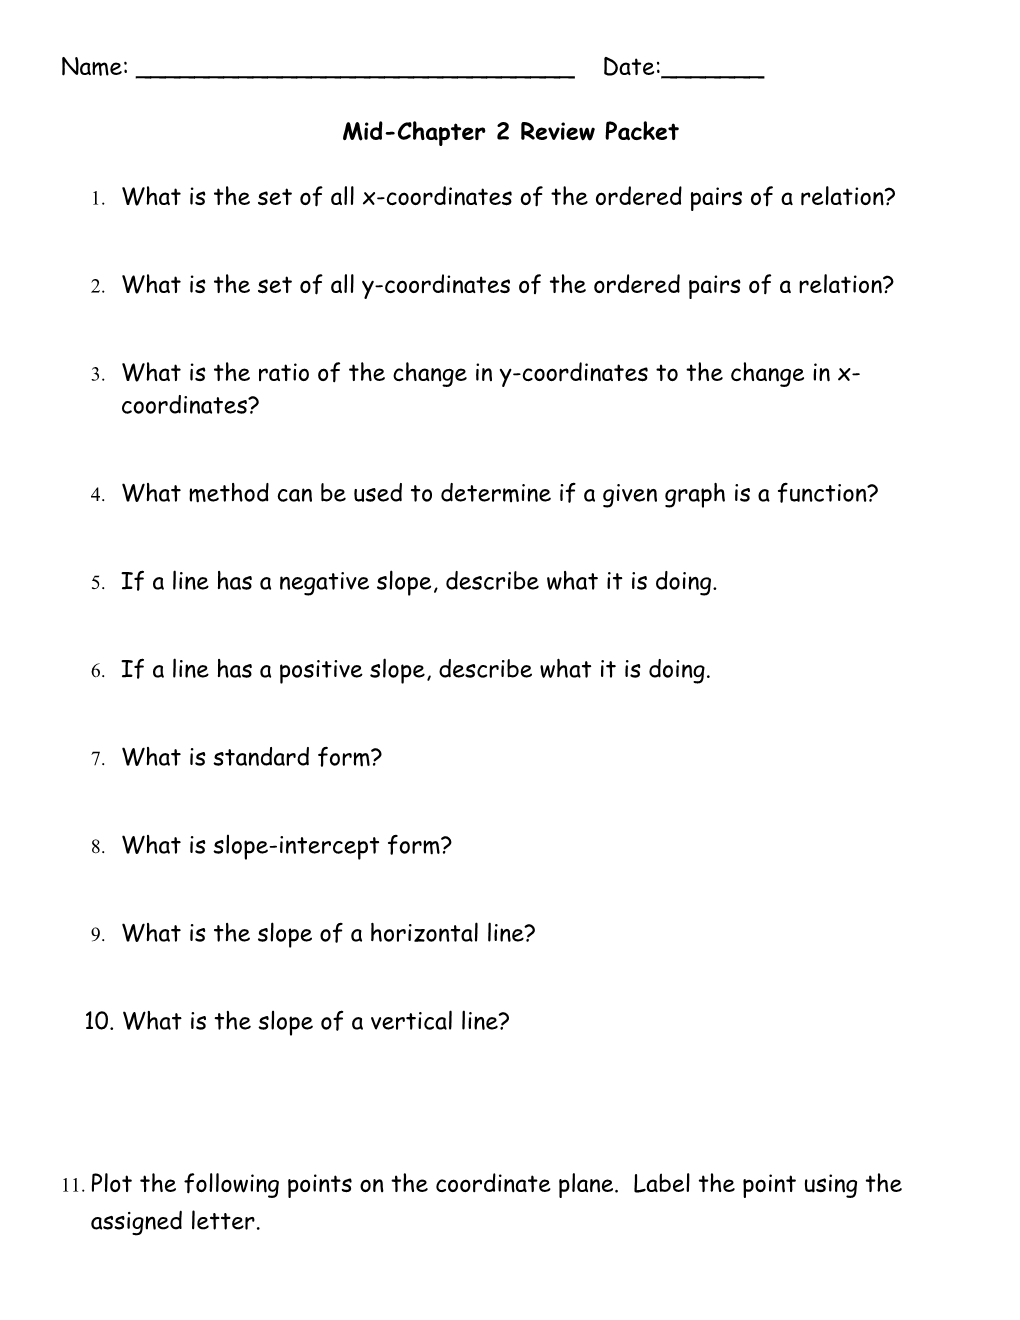 Mid-Chapter 2 Review Packet